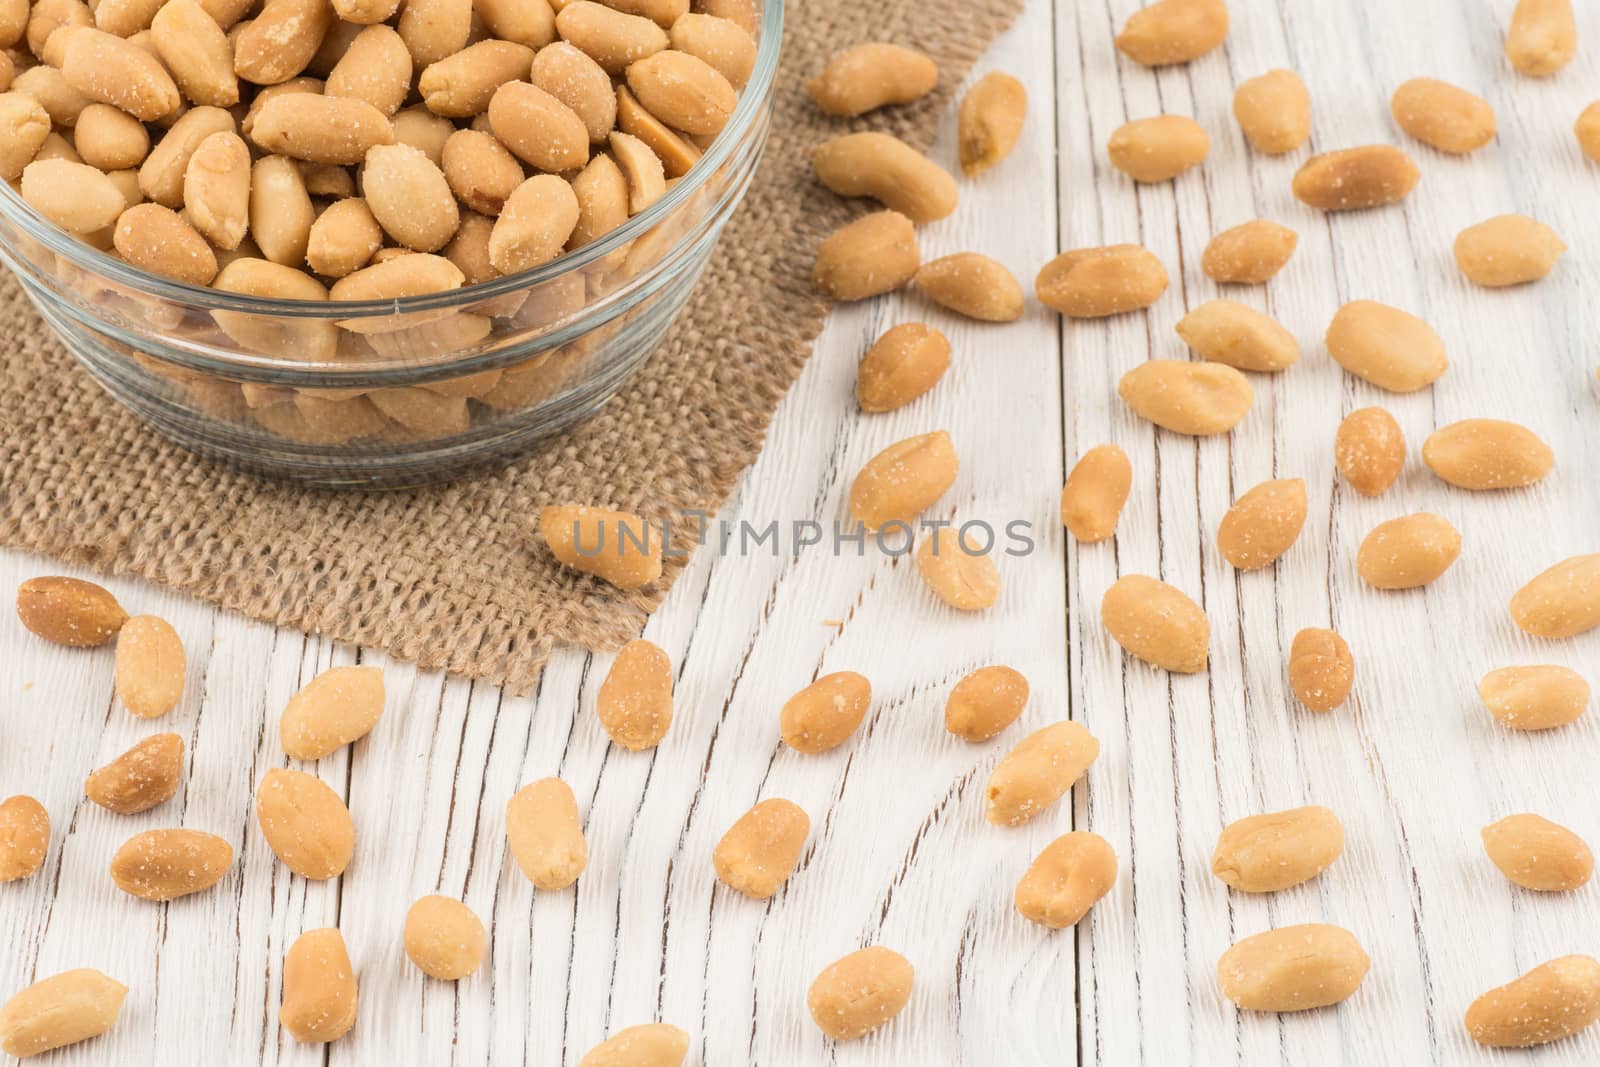 Salted peanuts in a glass bowl on the old wooden table. Selective focus.